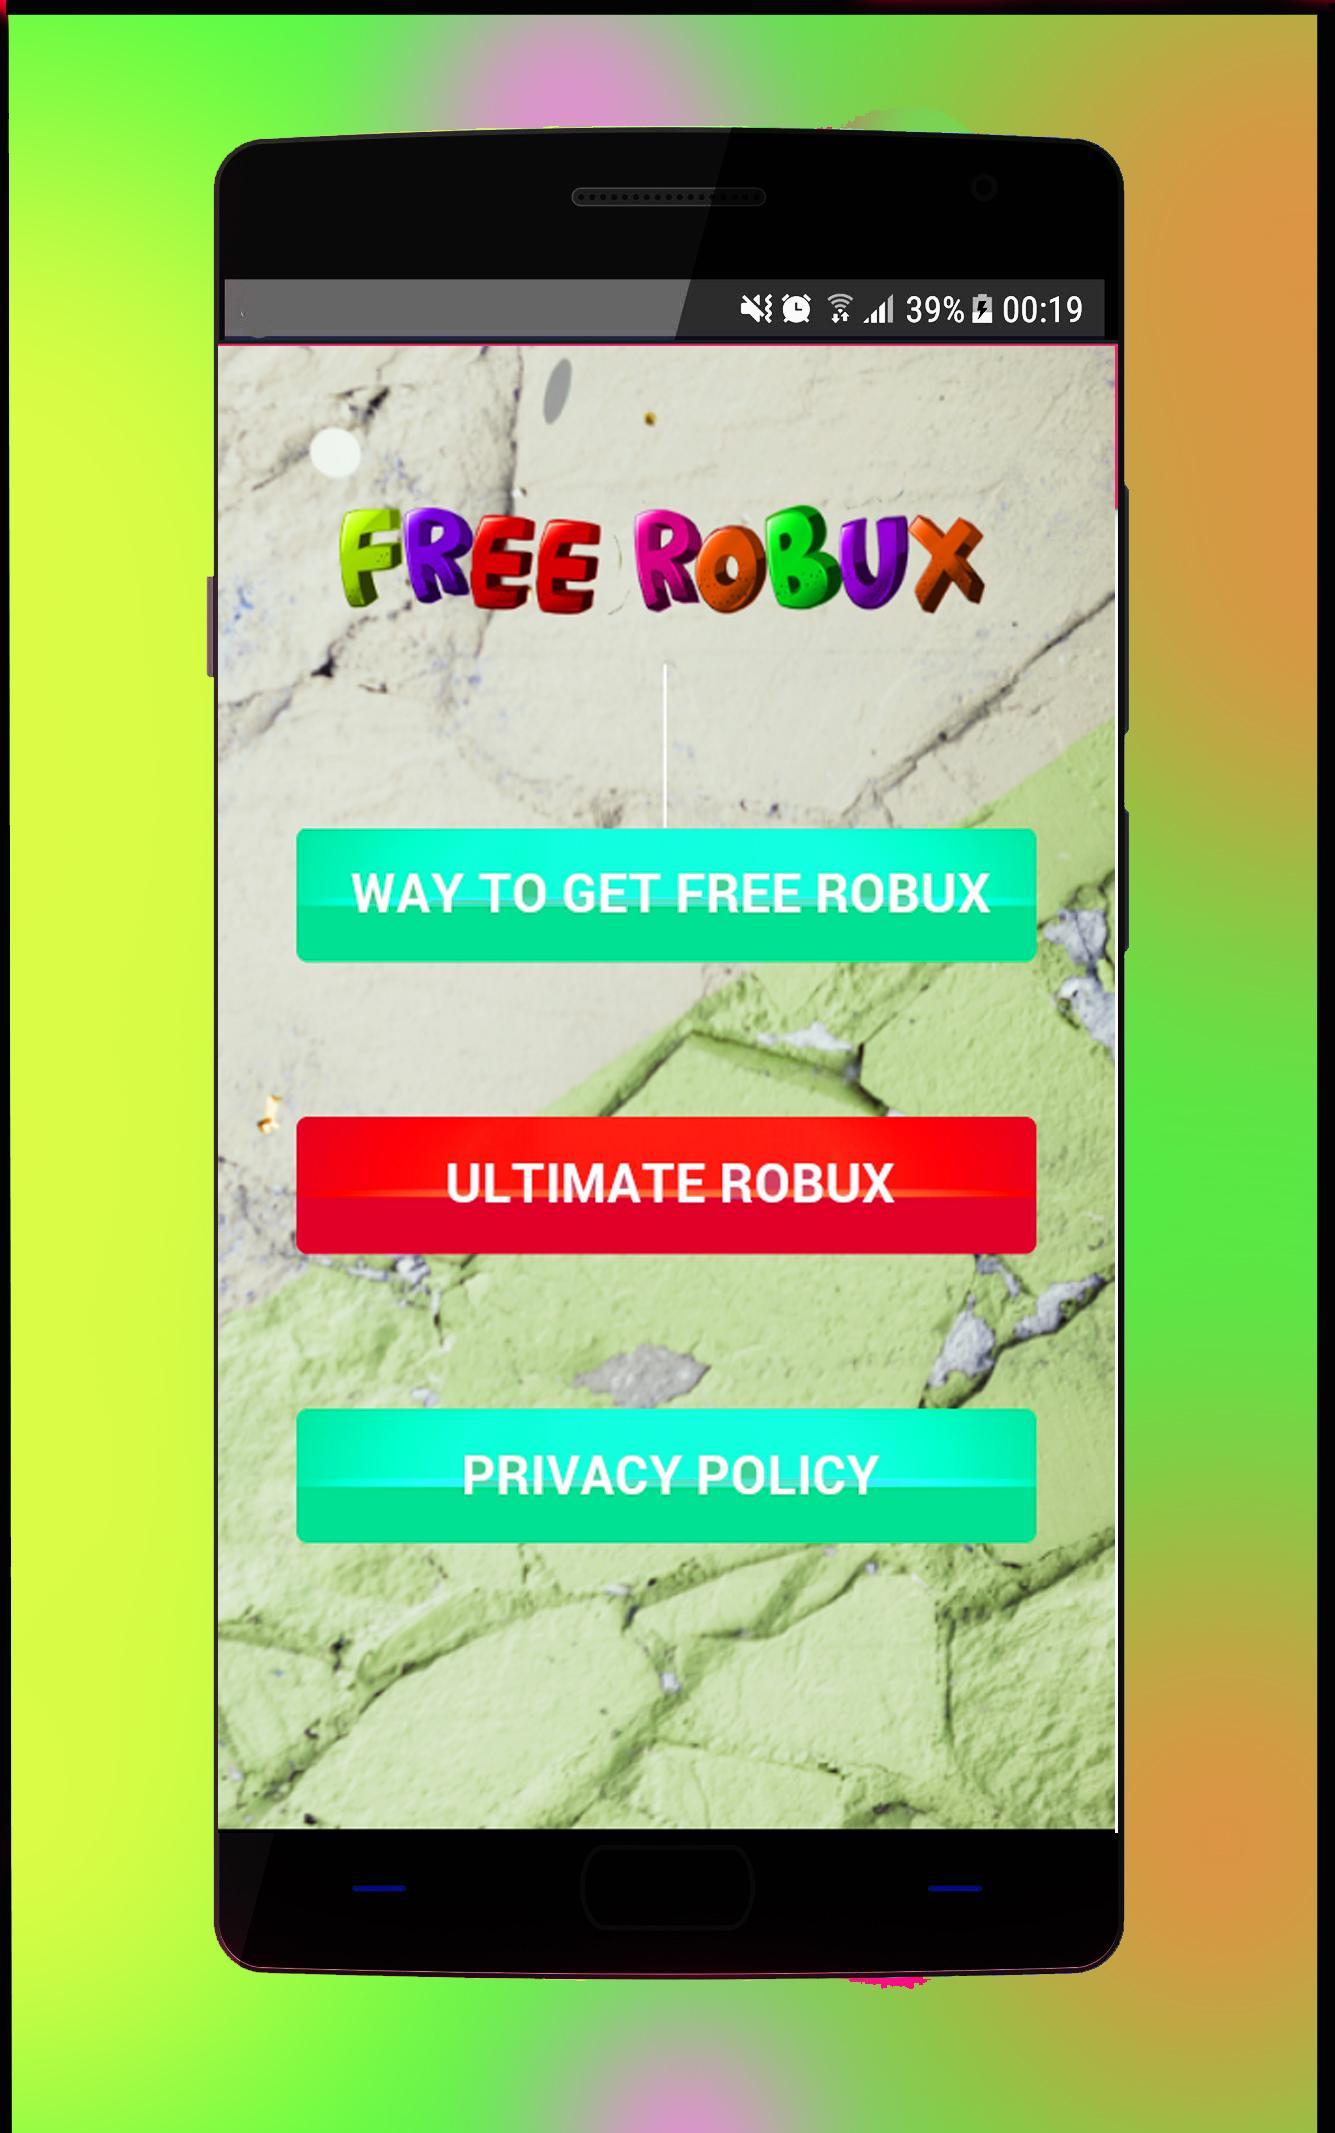 Get Free Robux Tips 2019 Now For Android Apk Download - how to get free robux on roblox mobile 2019